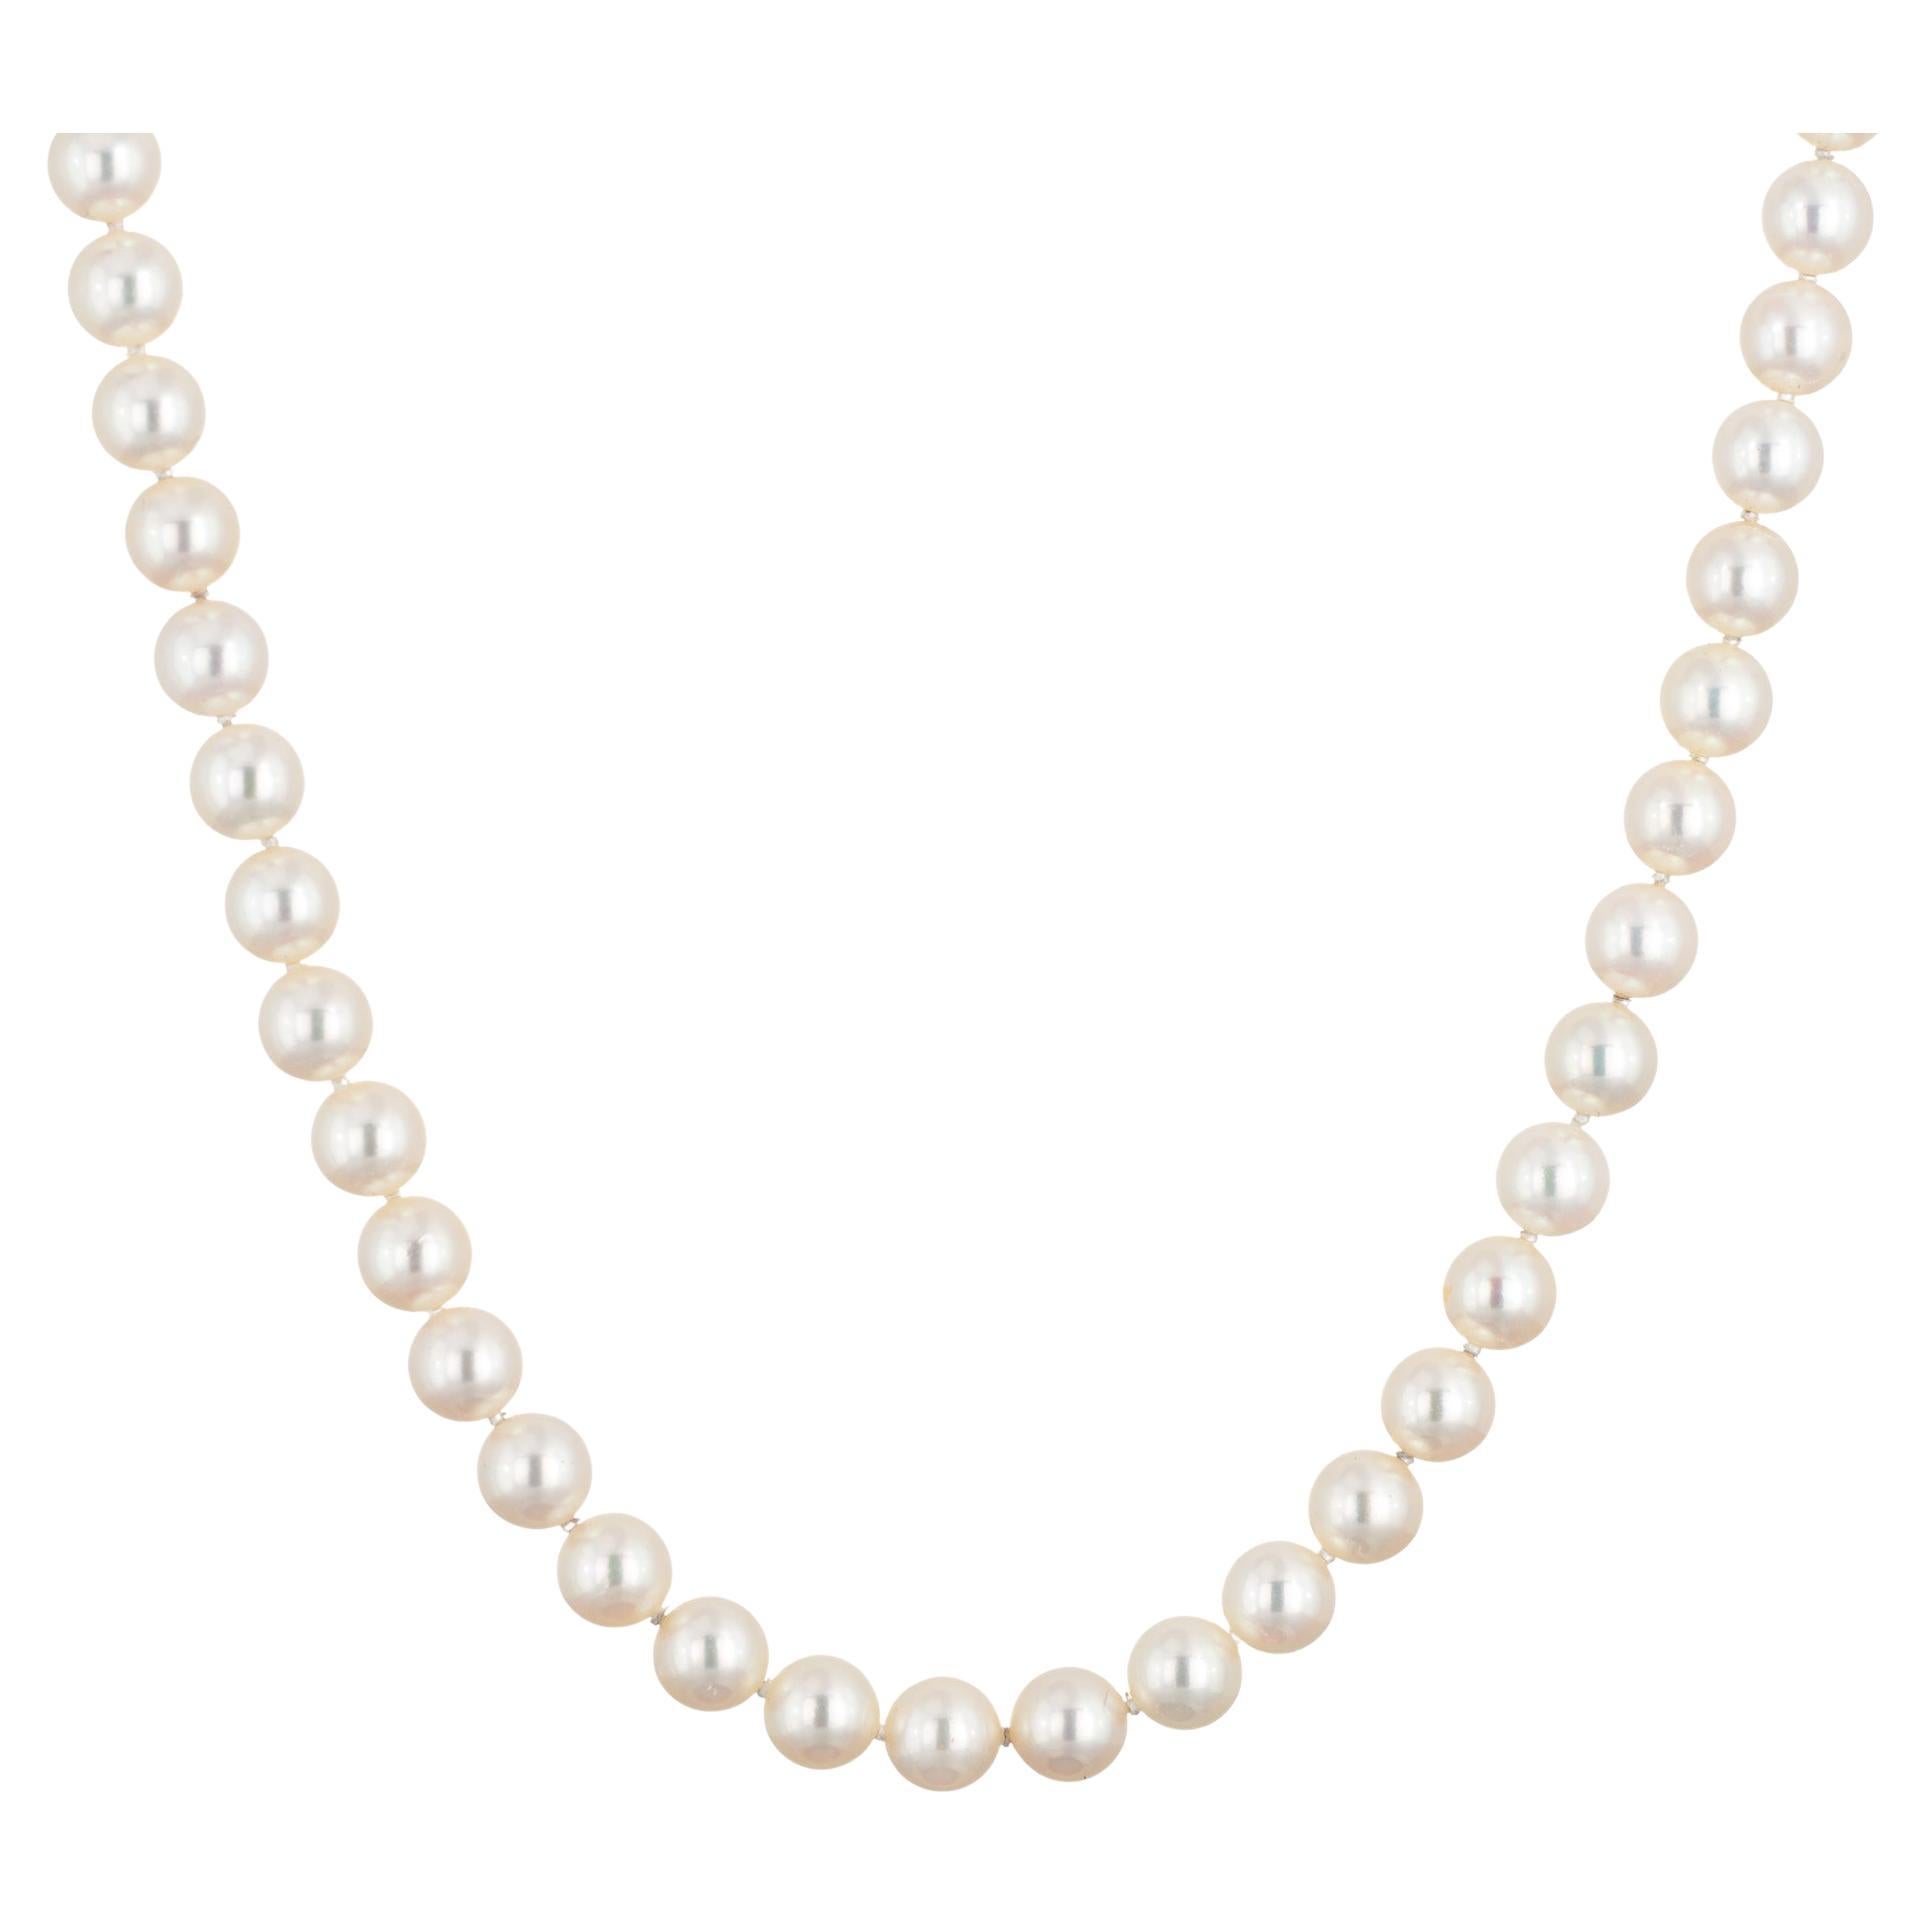 Tiffany & Co Essential Necklace 7mm Cultured Pearls 18k Yellow Gold Clasp 18"